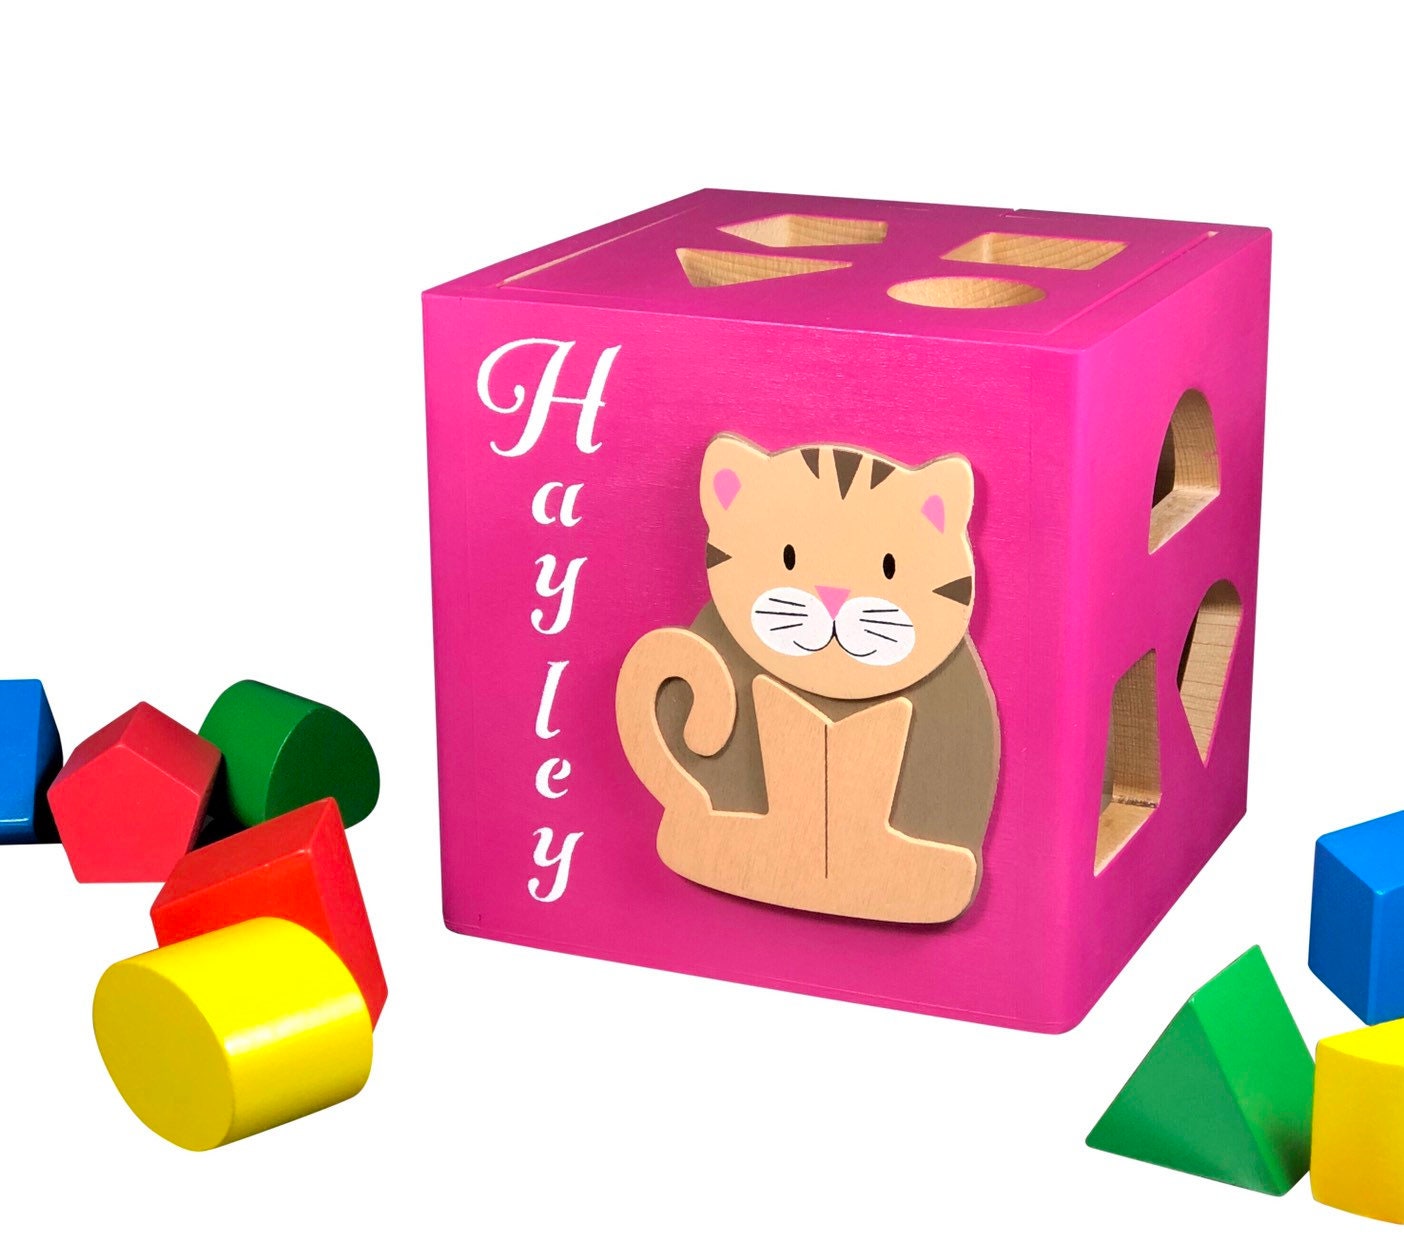 Baby toys / wooden baby toys / customized shape sorting box